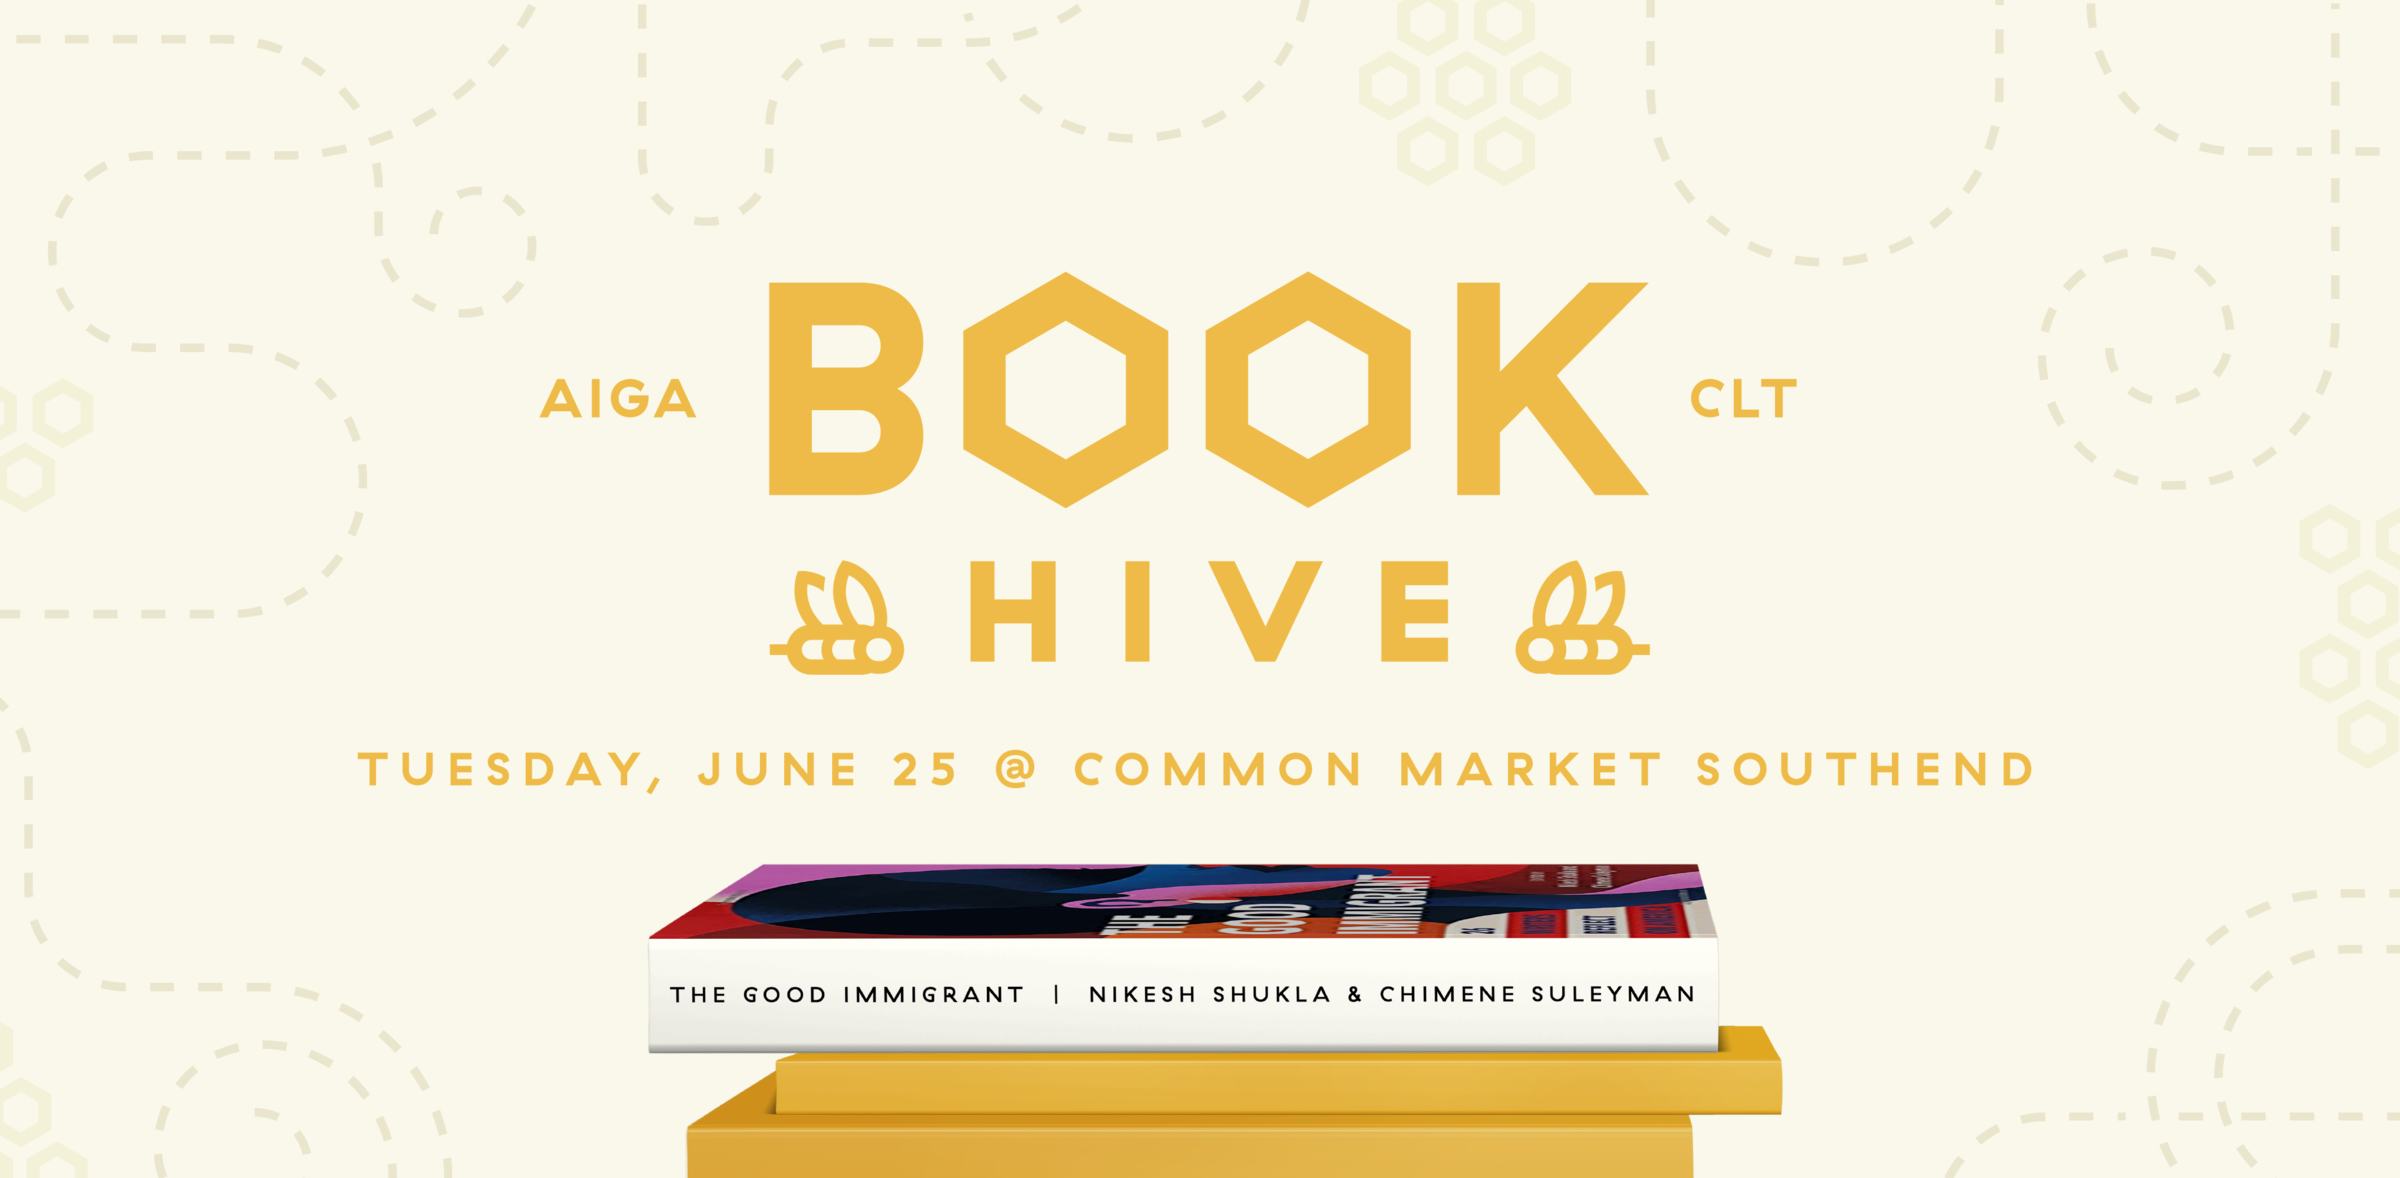 Bookhive: The Good Immigrant